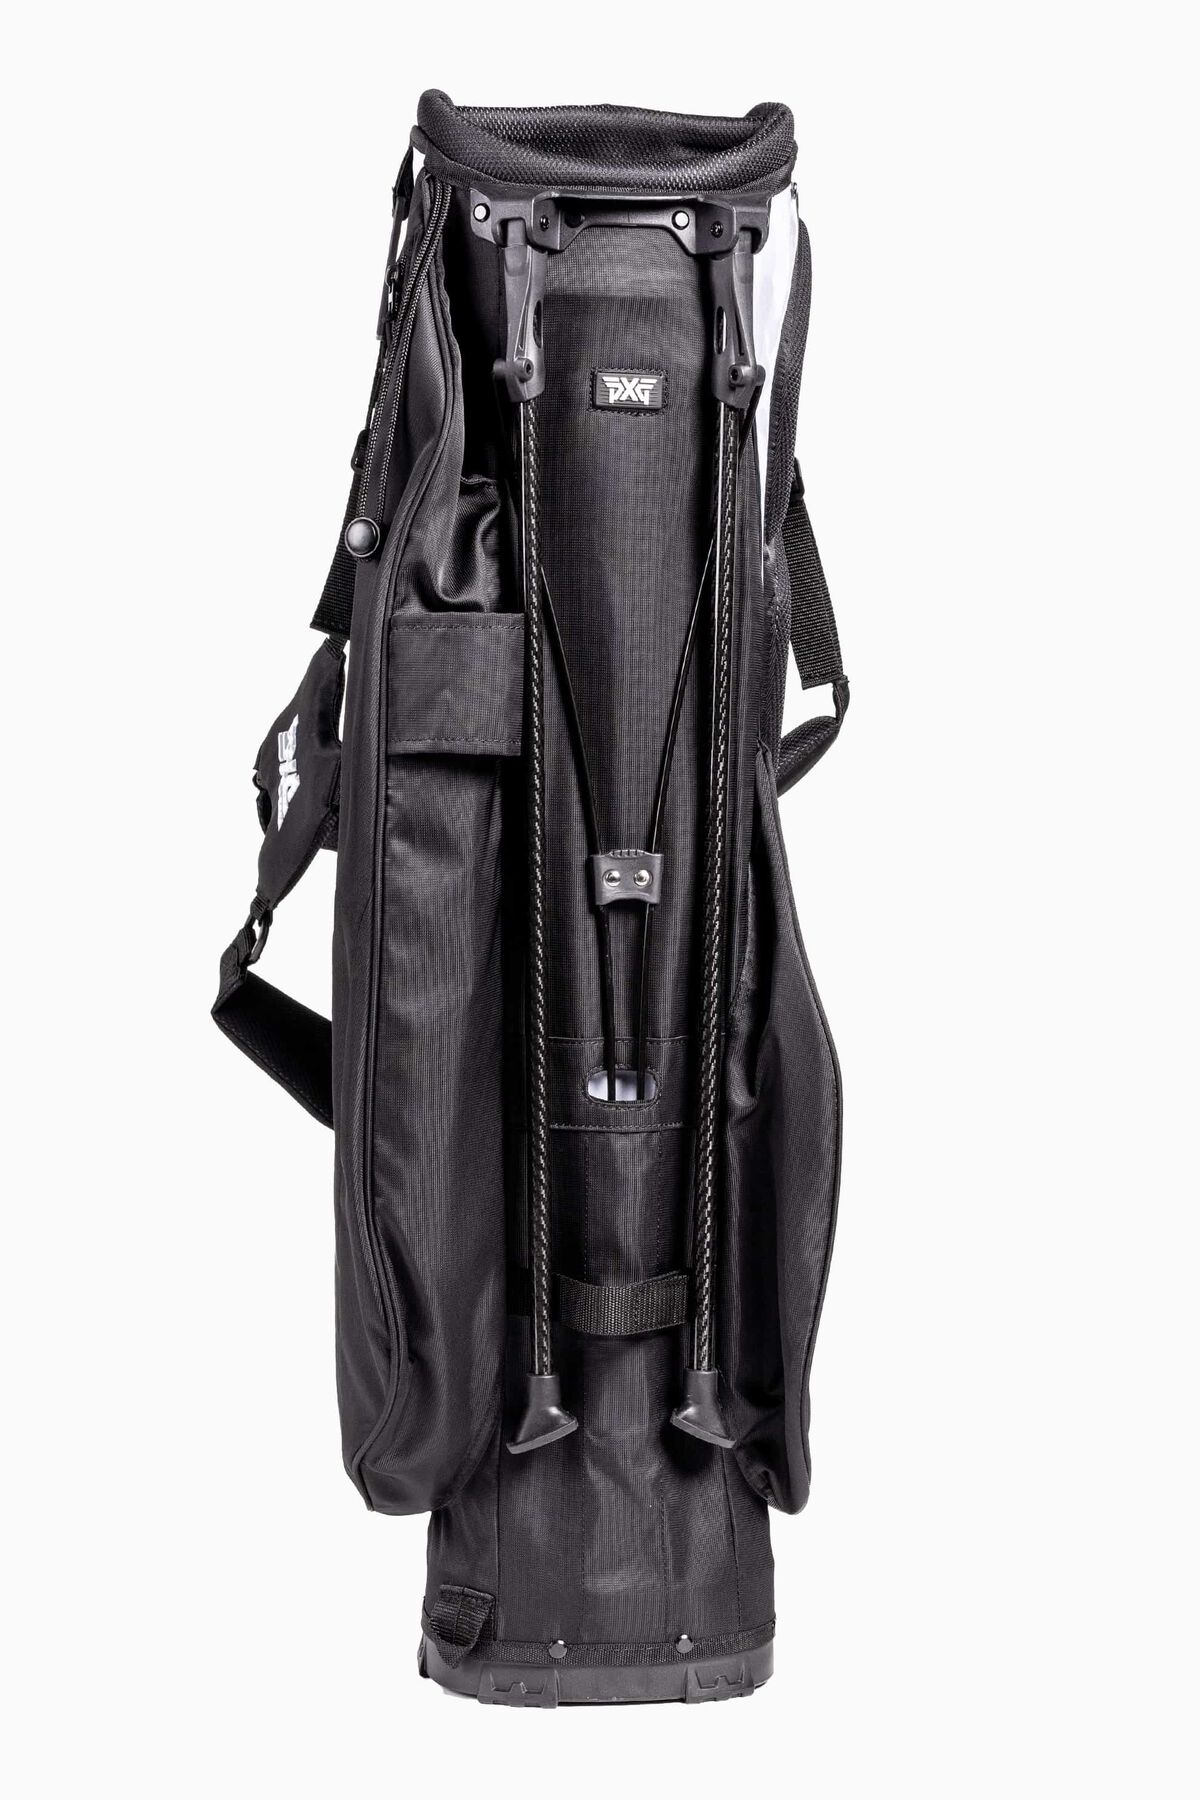 Freedom Collection Lightweight Carry Stand Bag 